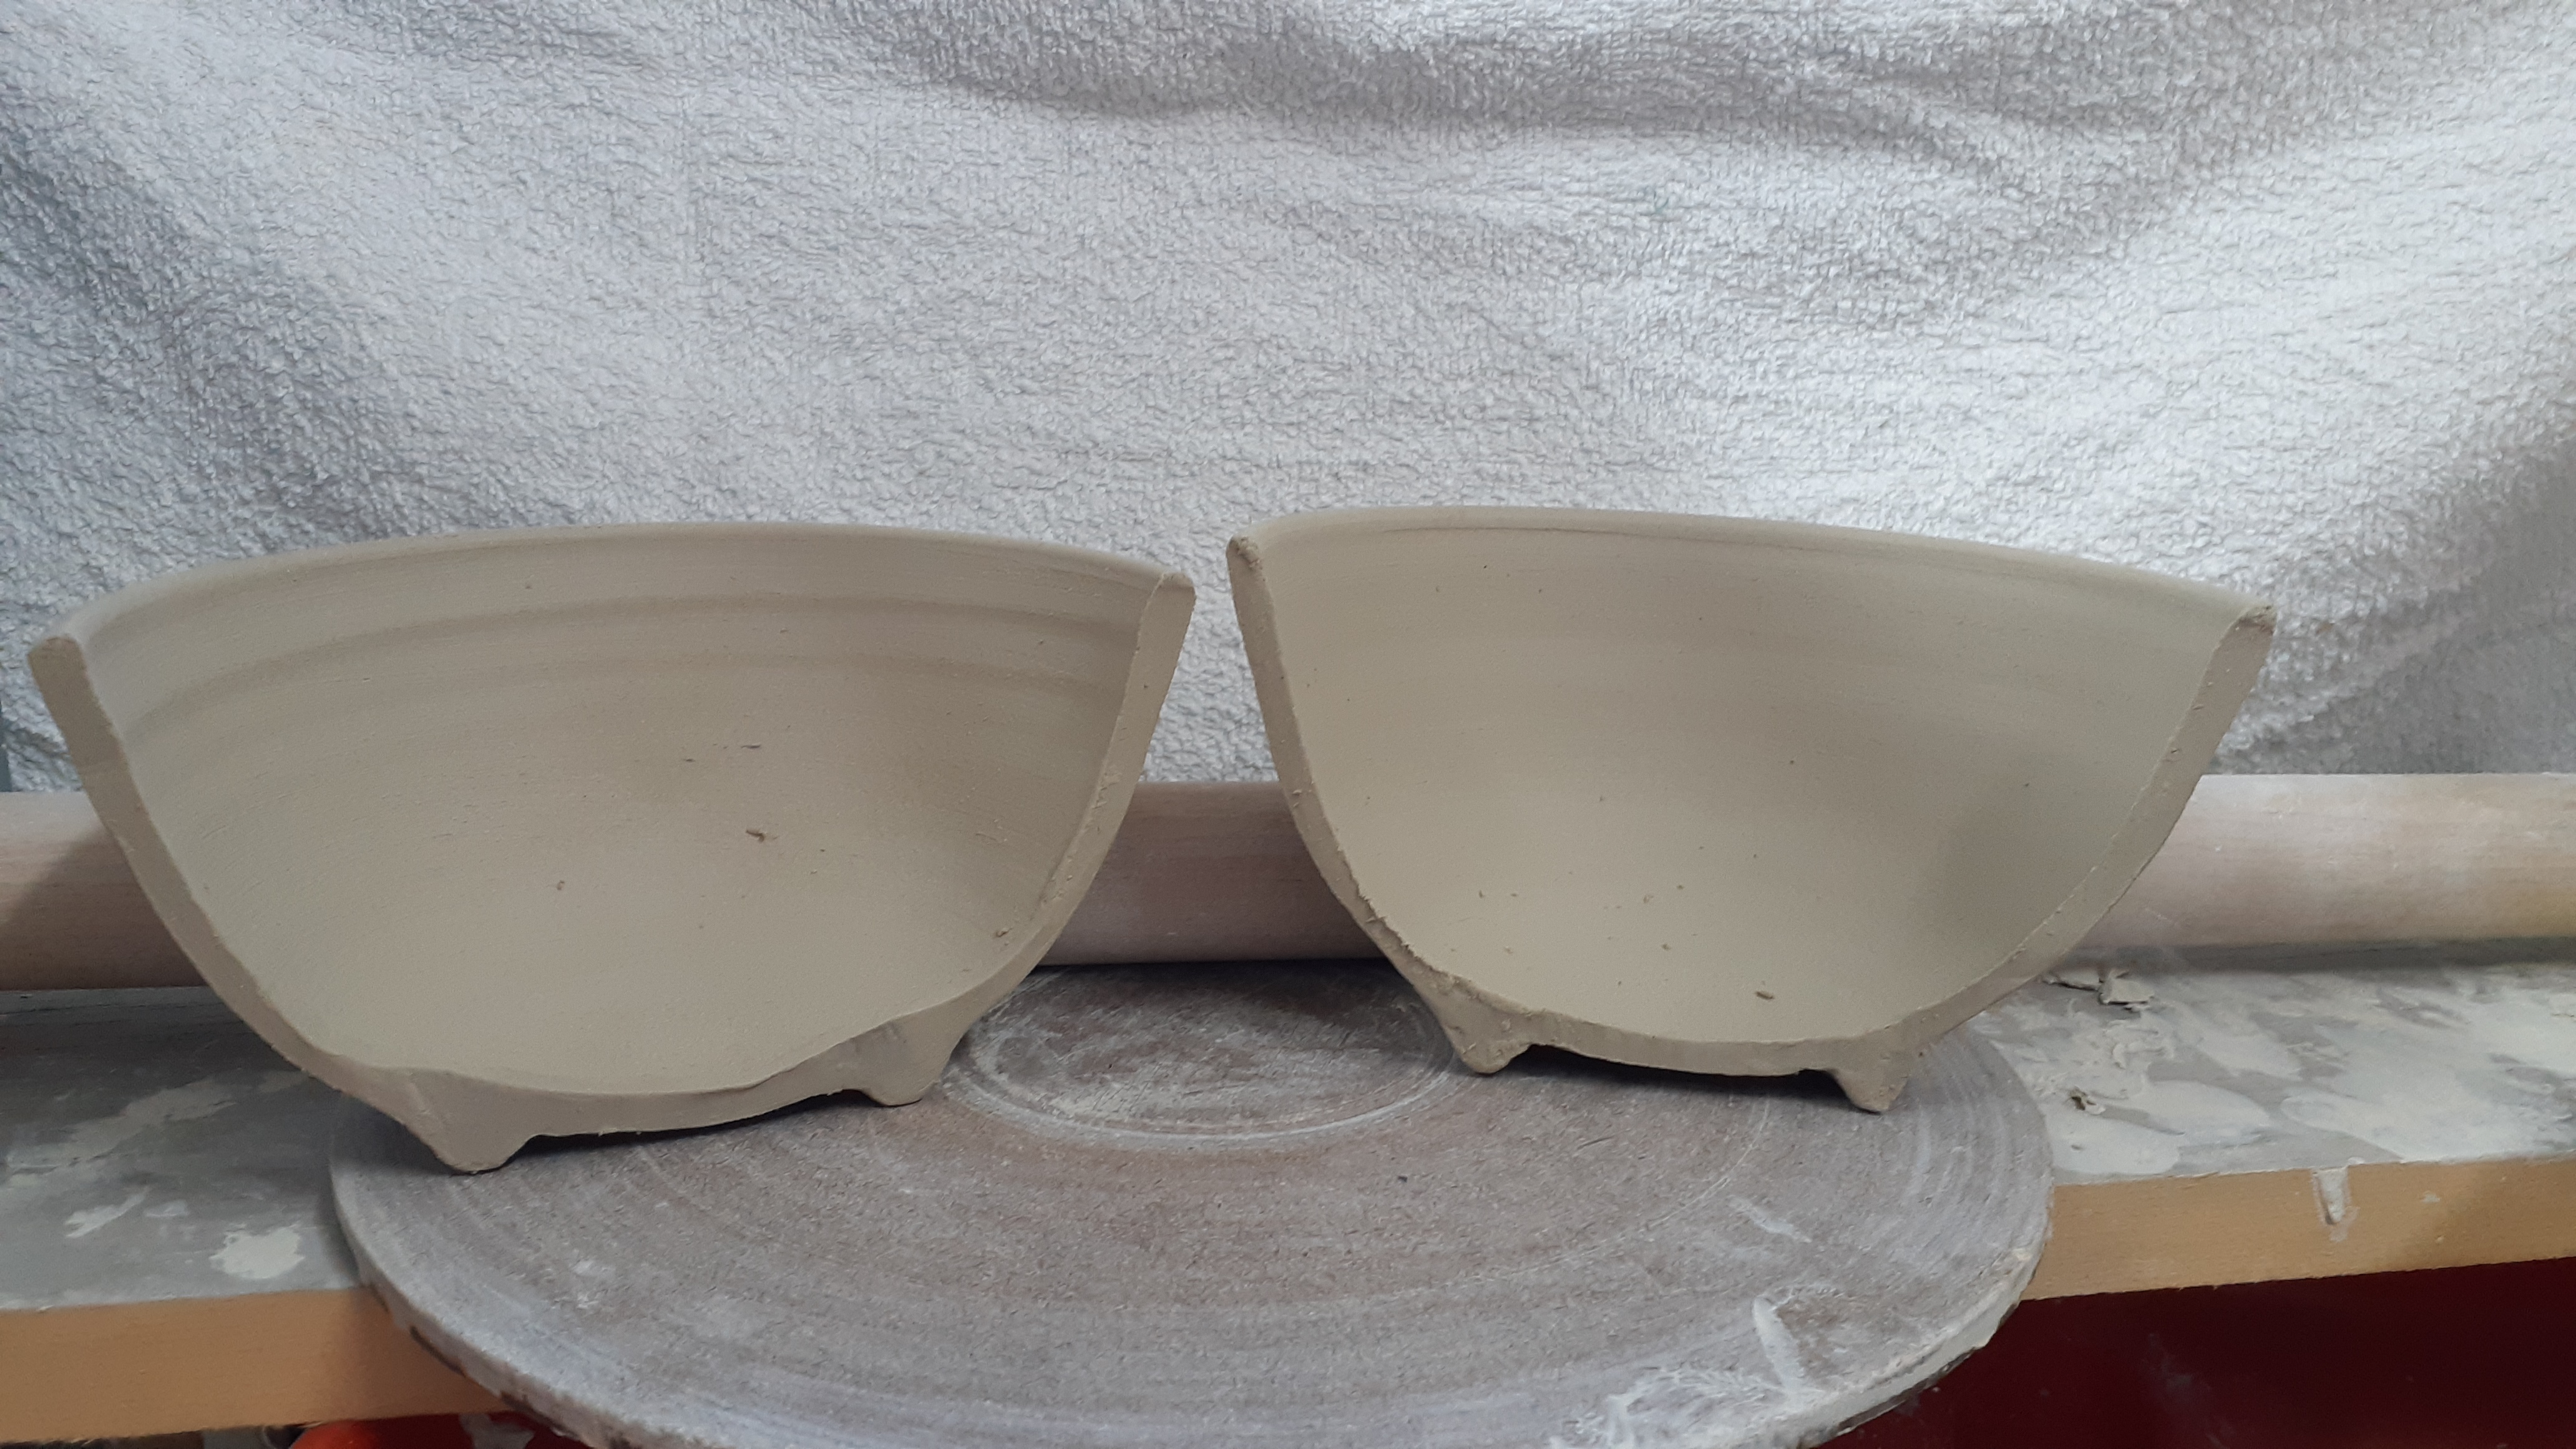 Two bowls cut in half. The bowl on the left illustrates bowl slumping, the one on the right shows the improvement in both form and function